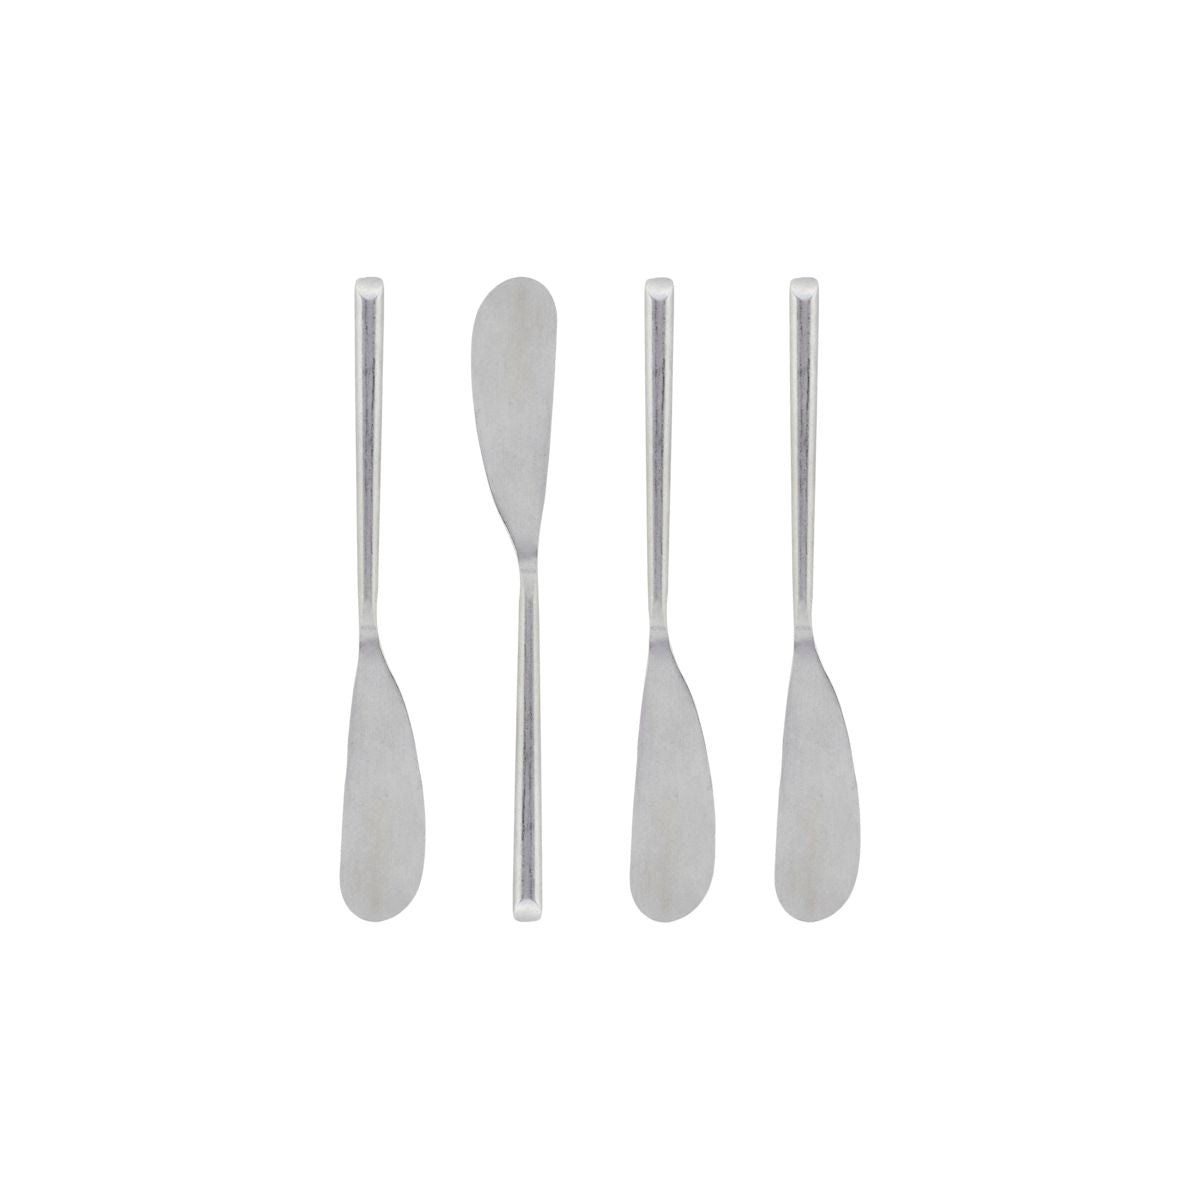 Butter Knives pack of 4 in Stainless Steel